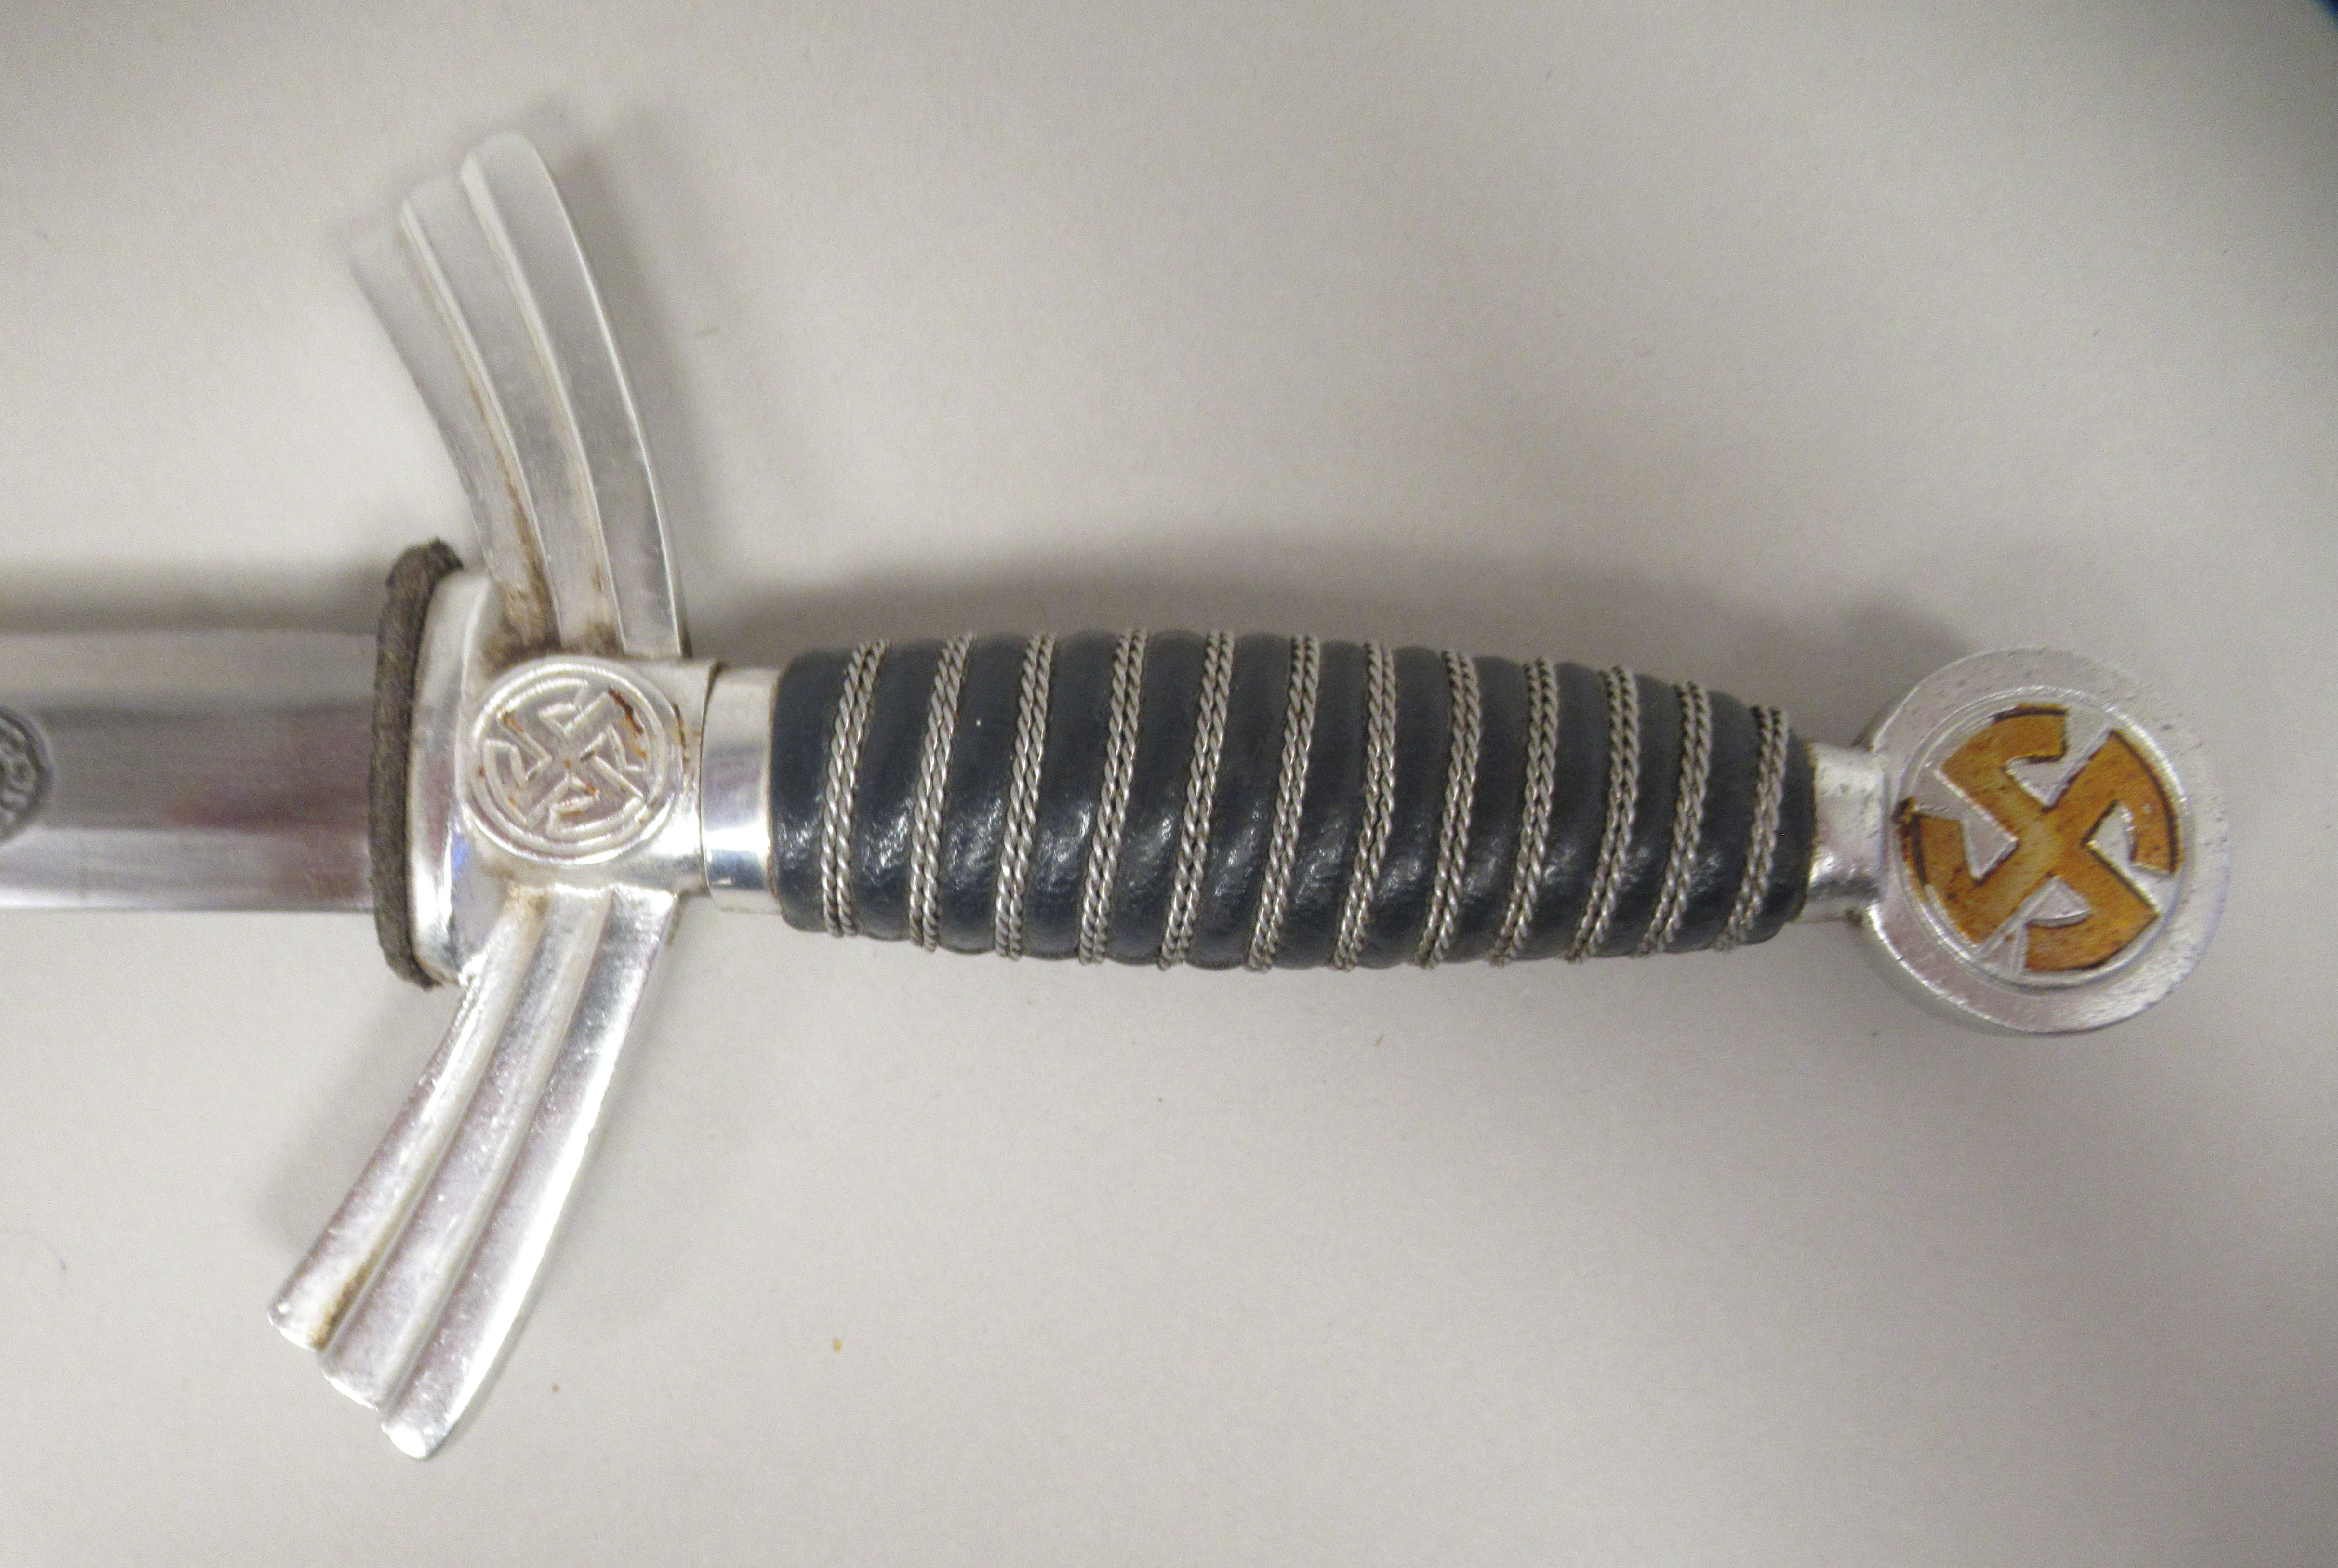 A German SS dress dagger with swastika emblems on the pommel and hilt and a woven wire band - Image 3 of 7